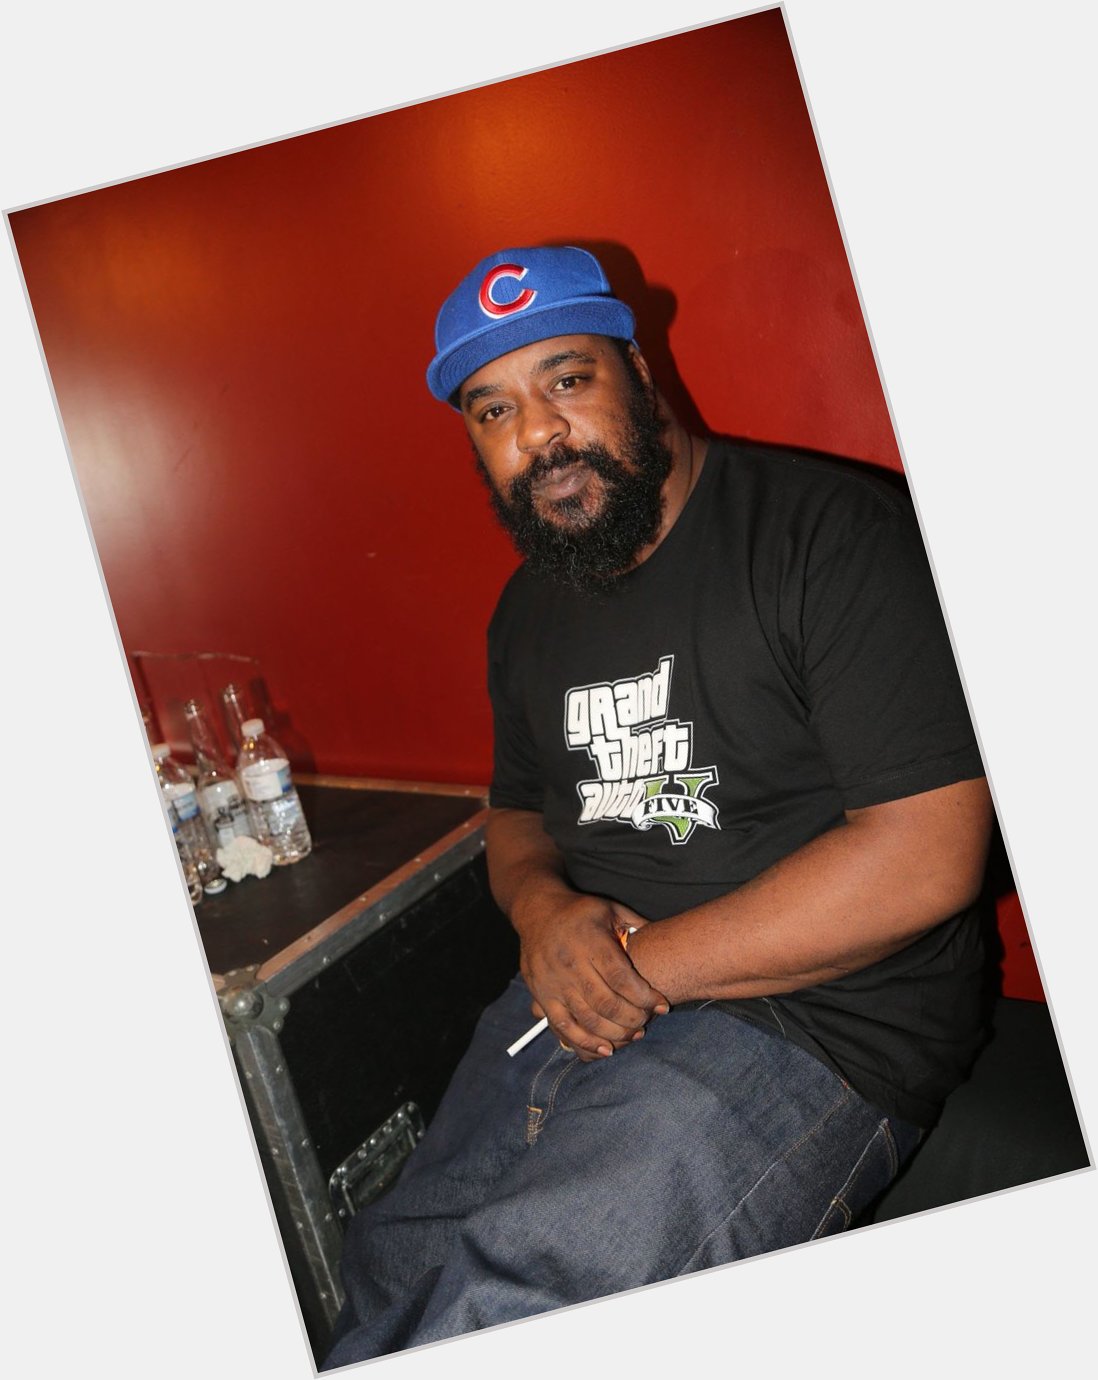 Happy birthday to the legend Sean Price. Very underrated MC & has multiple classics. Whats your favorite song? 